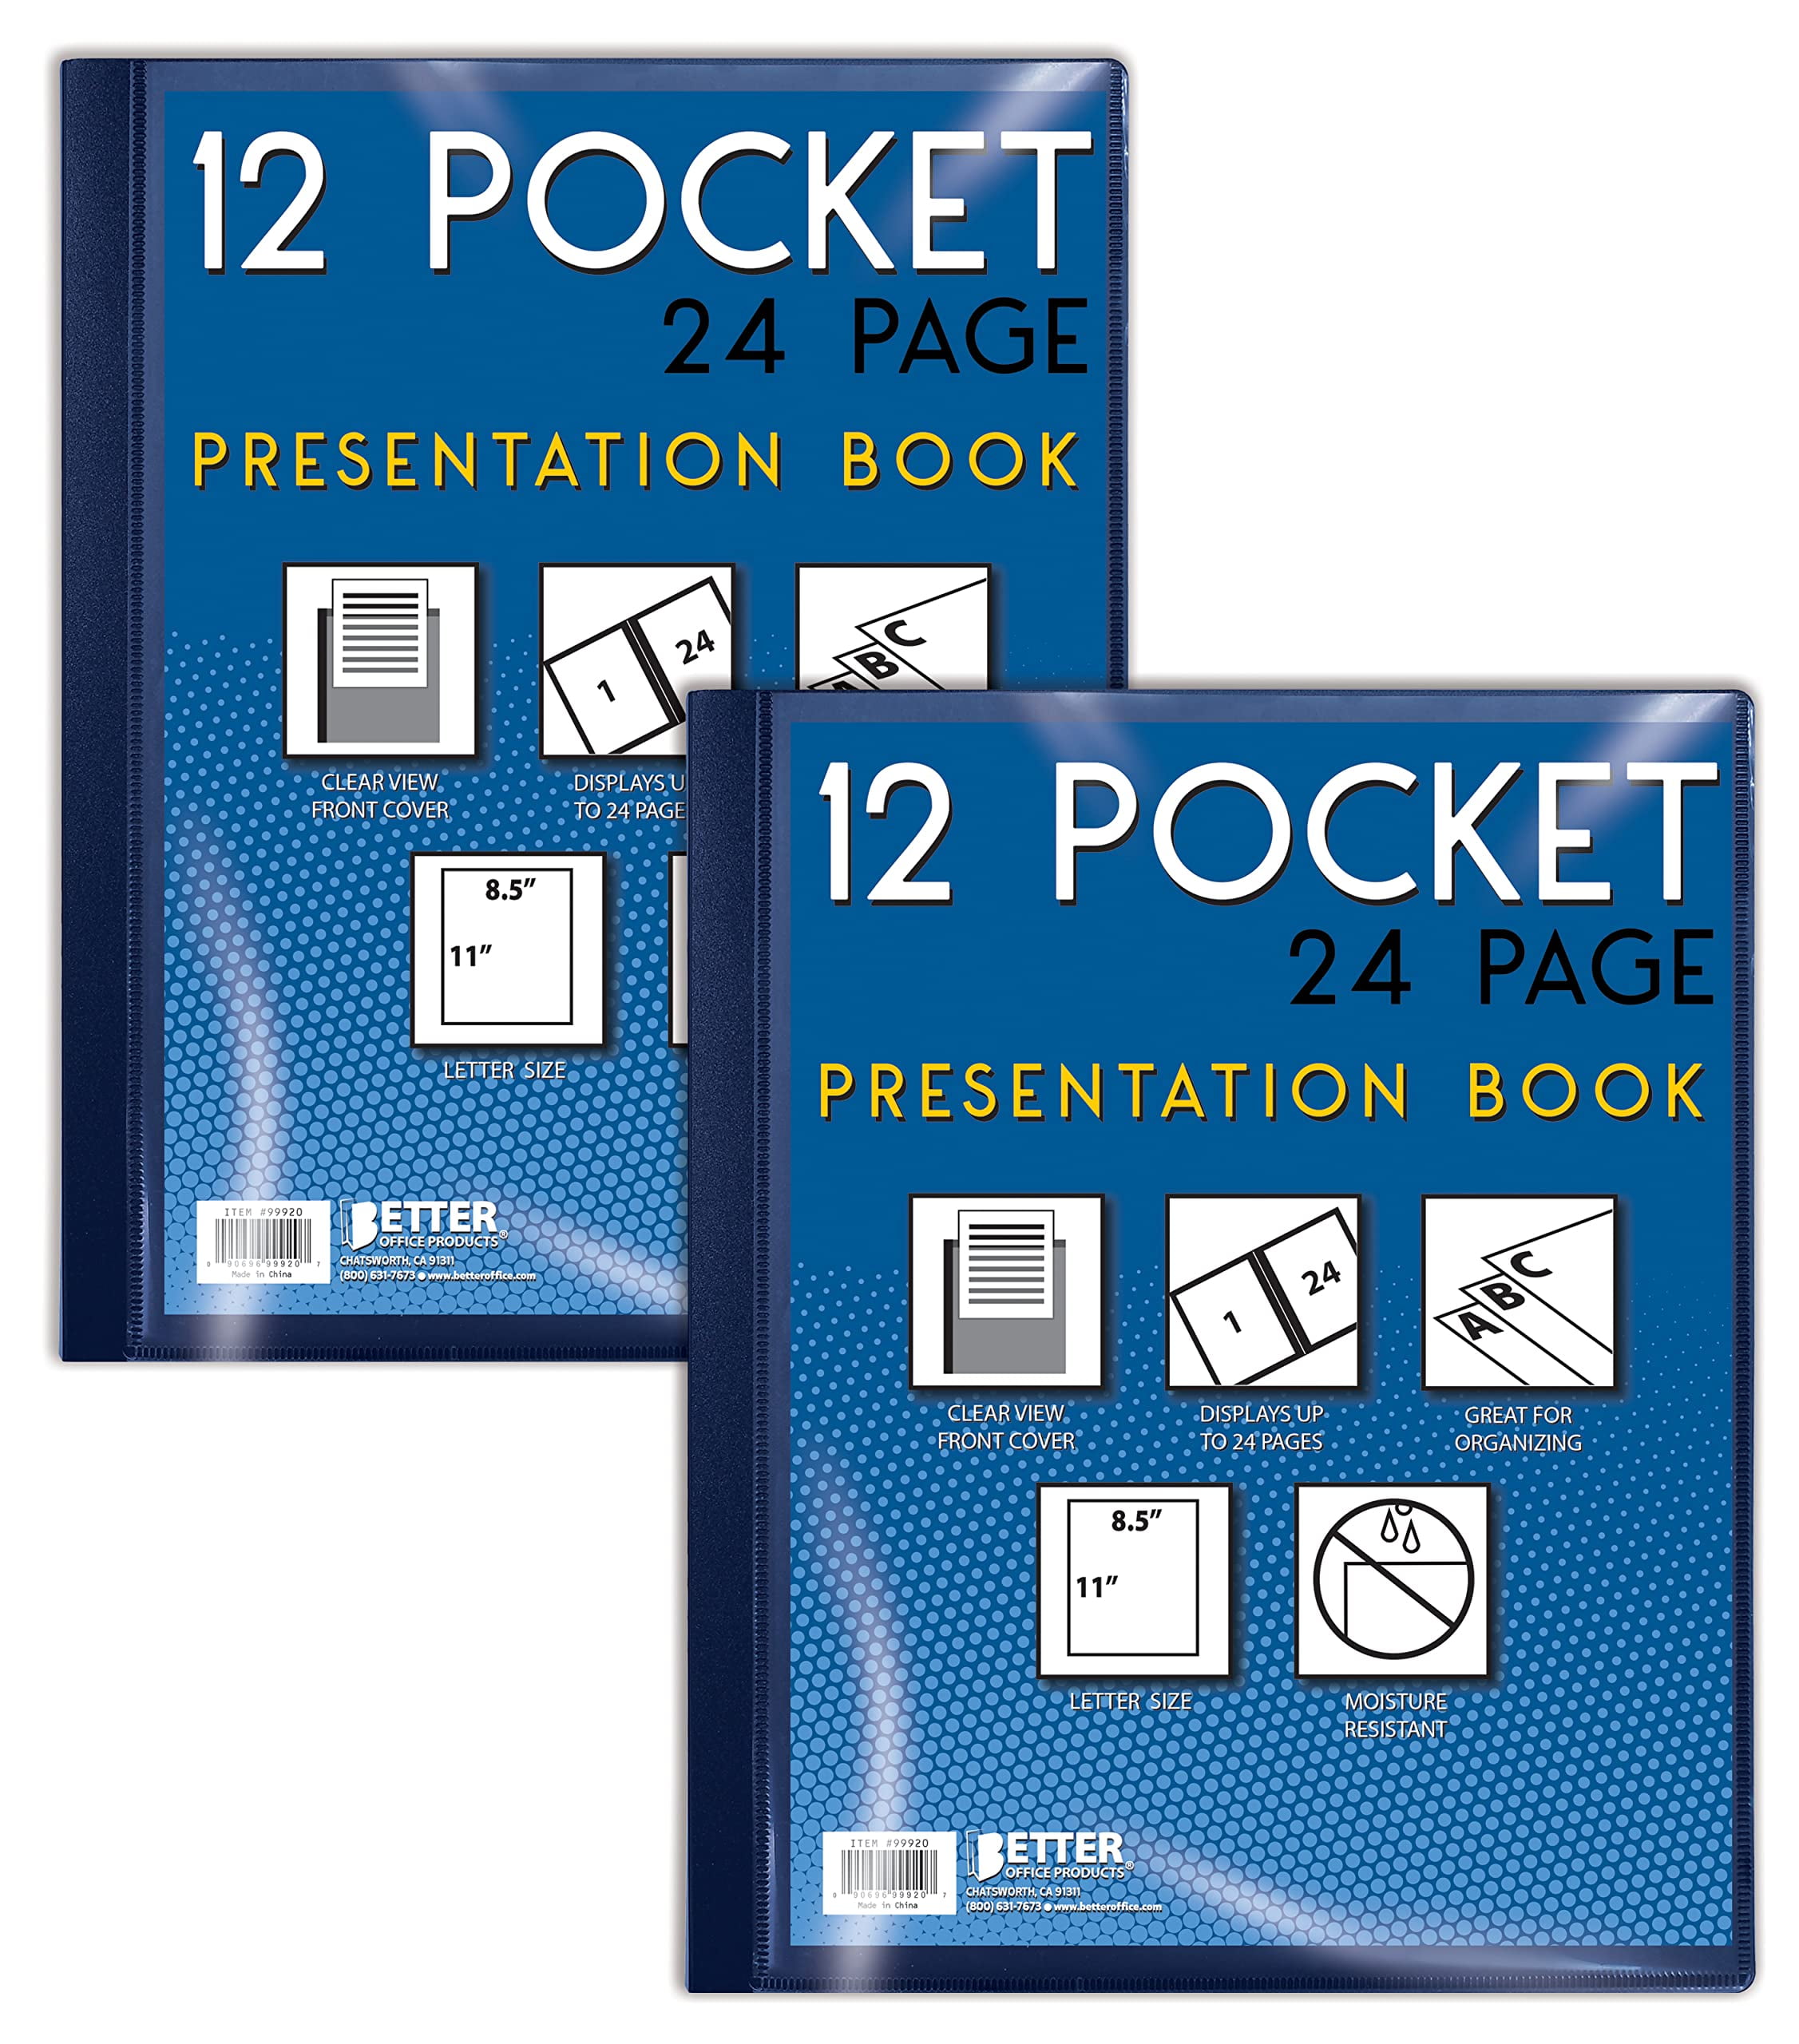 12 Pocket Bound Presentation Book, Blue, Clear View Front Cover, 24 Sheet  Protector Pages, 8.5 x 11 Sheets, by Better Office Products, Art